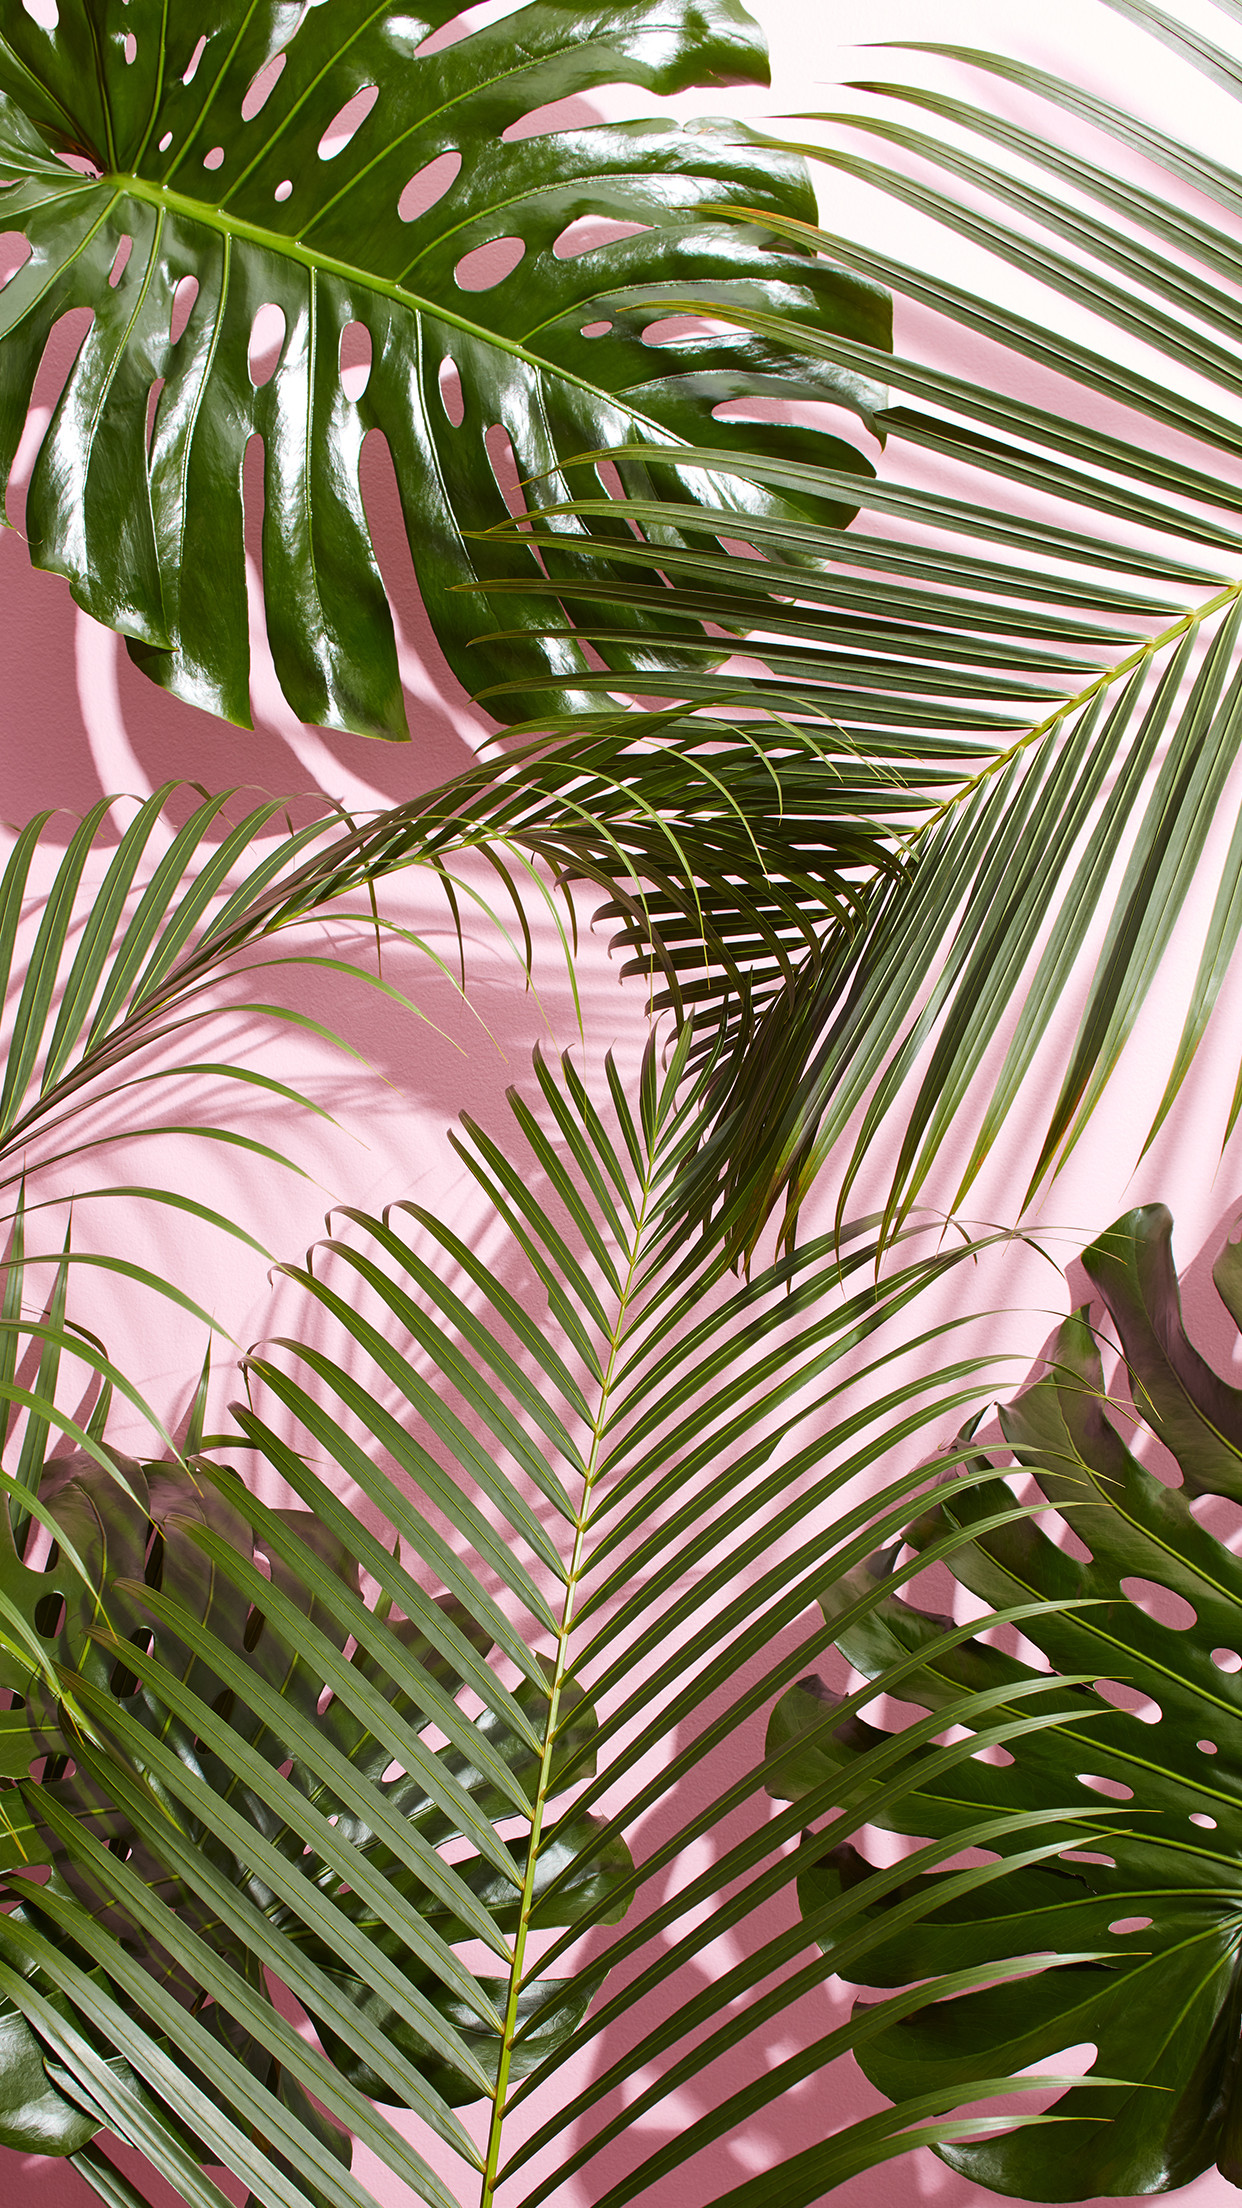 West elm – Tropical Leaves Desktop and Mobile Wallpaper Download – Palm and Monstera